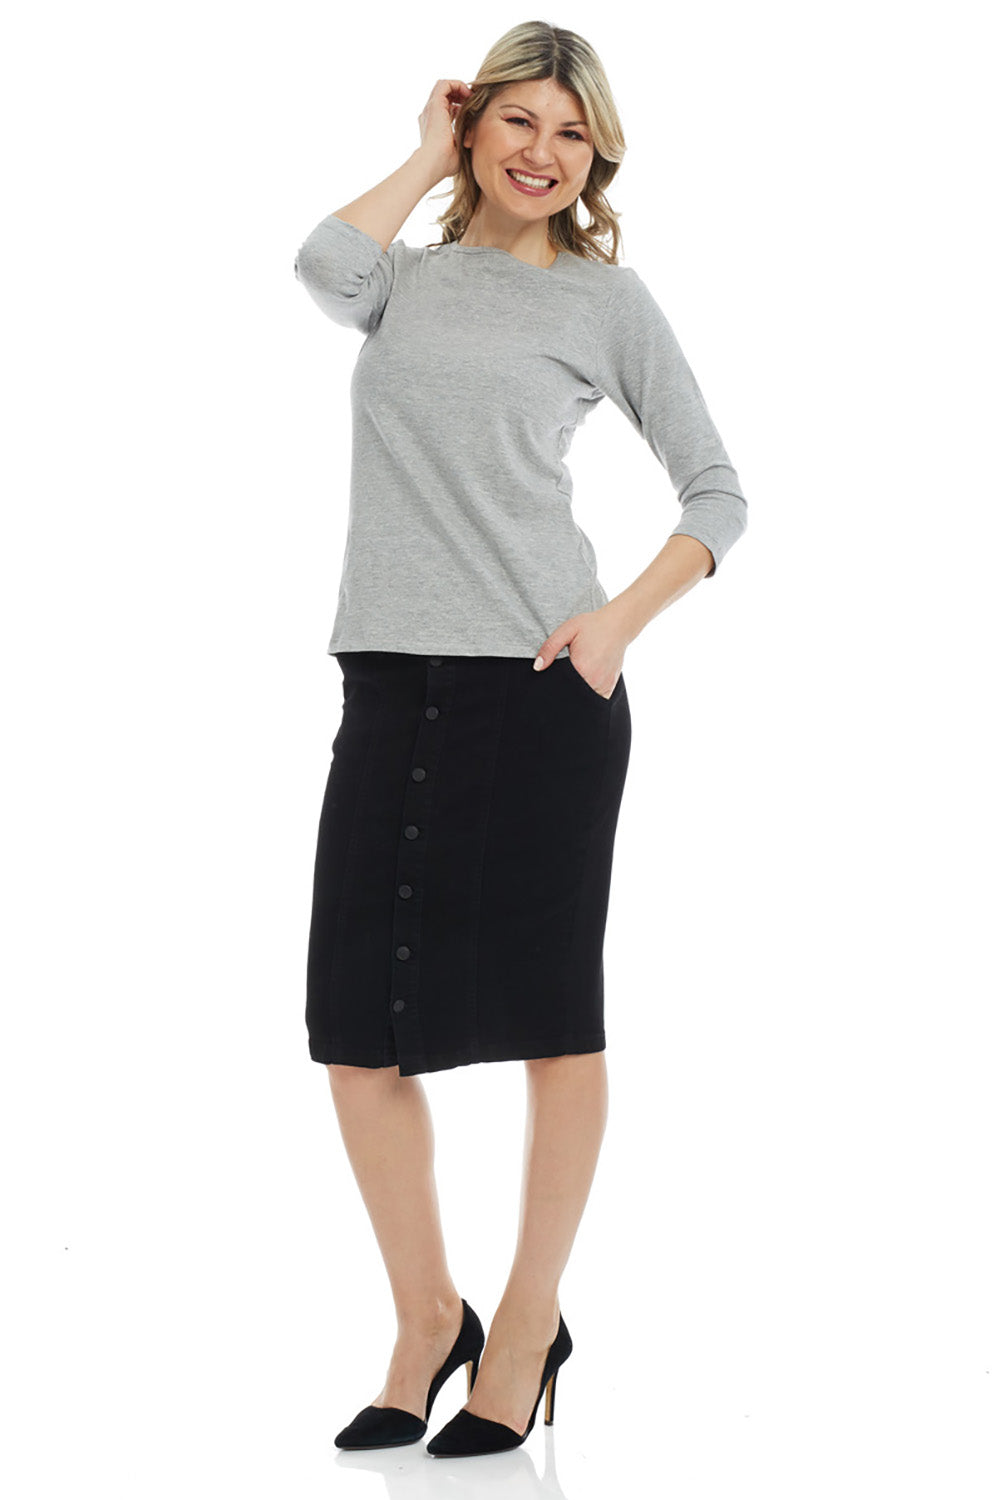 black button down below the knee denim jean pencil skirt with pockets and belt loops for women